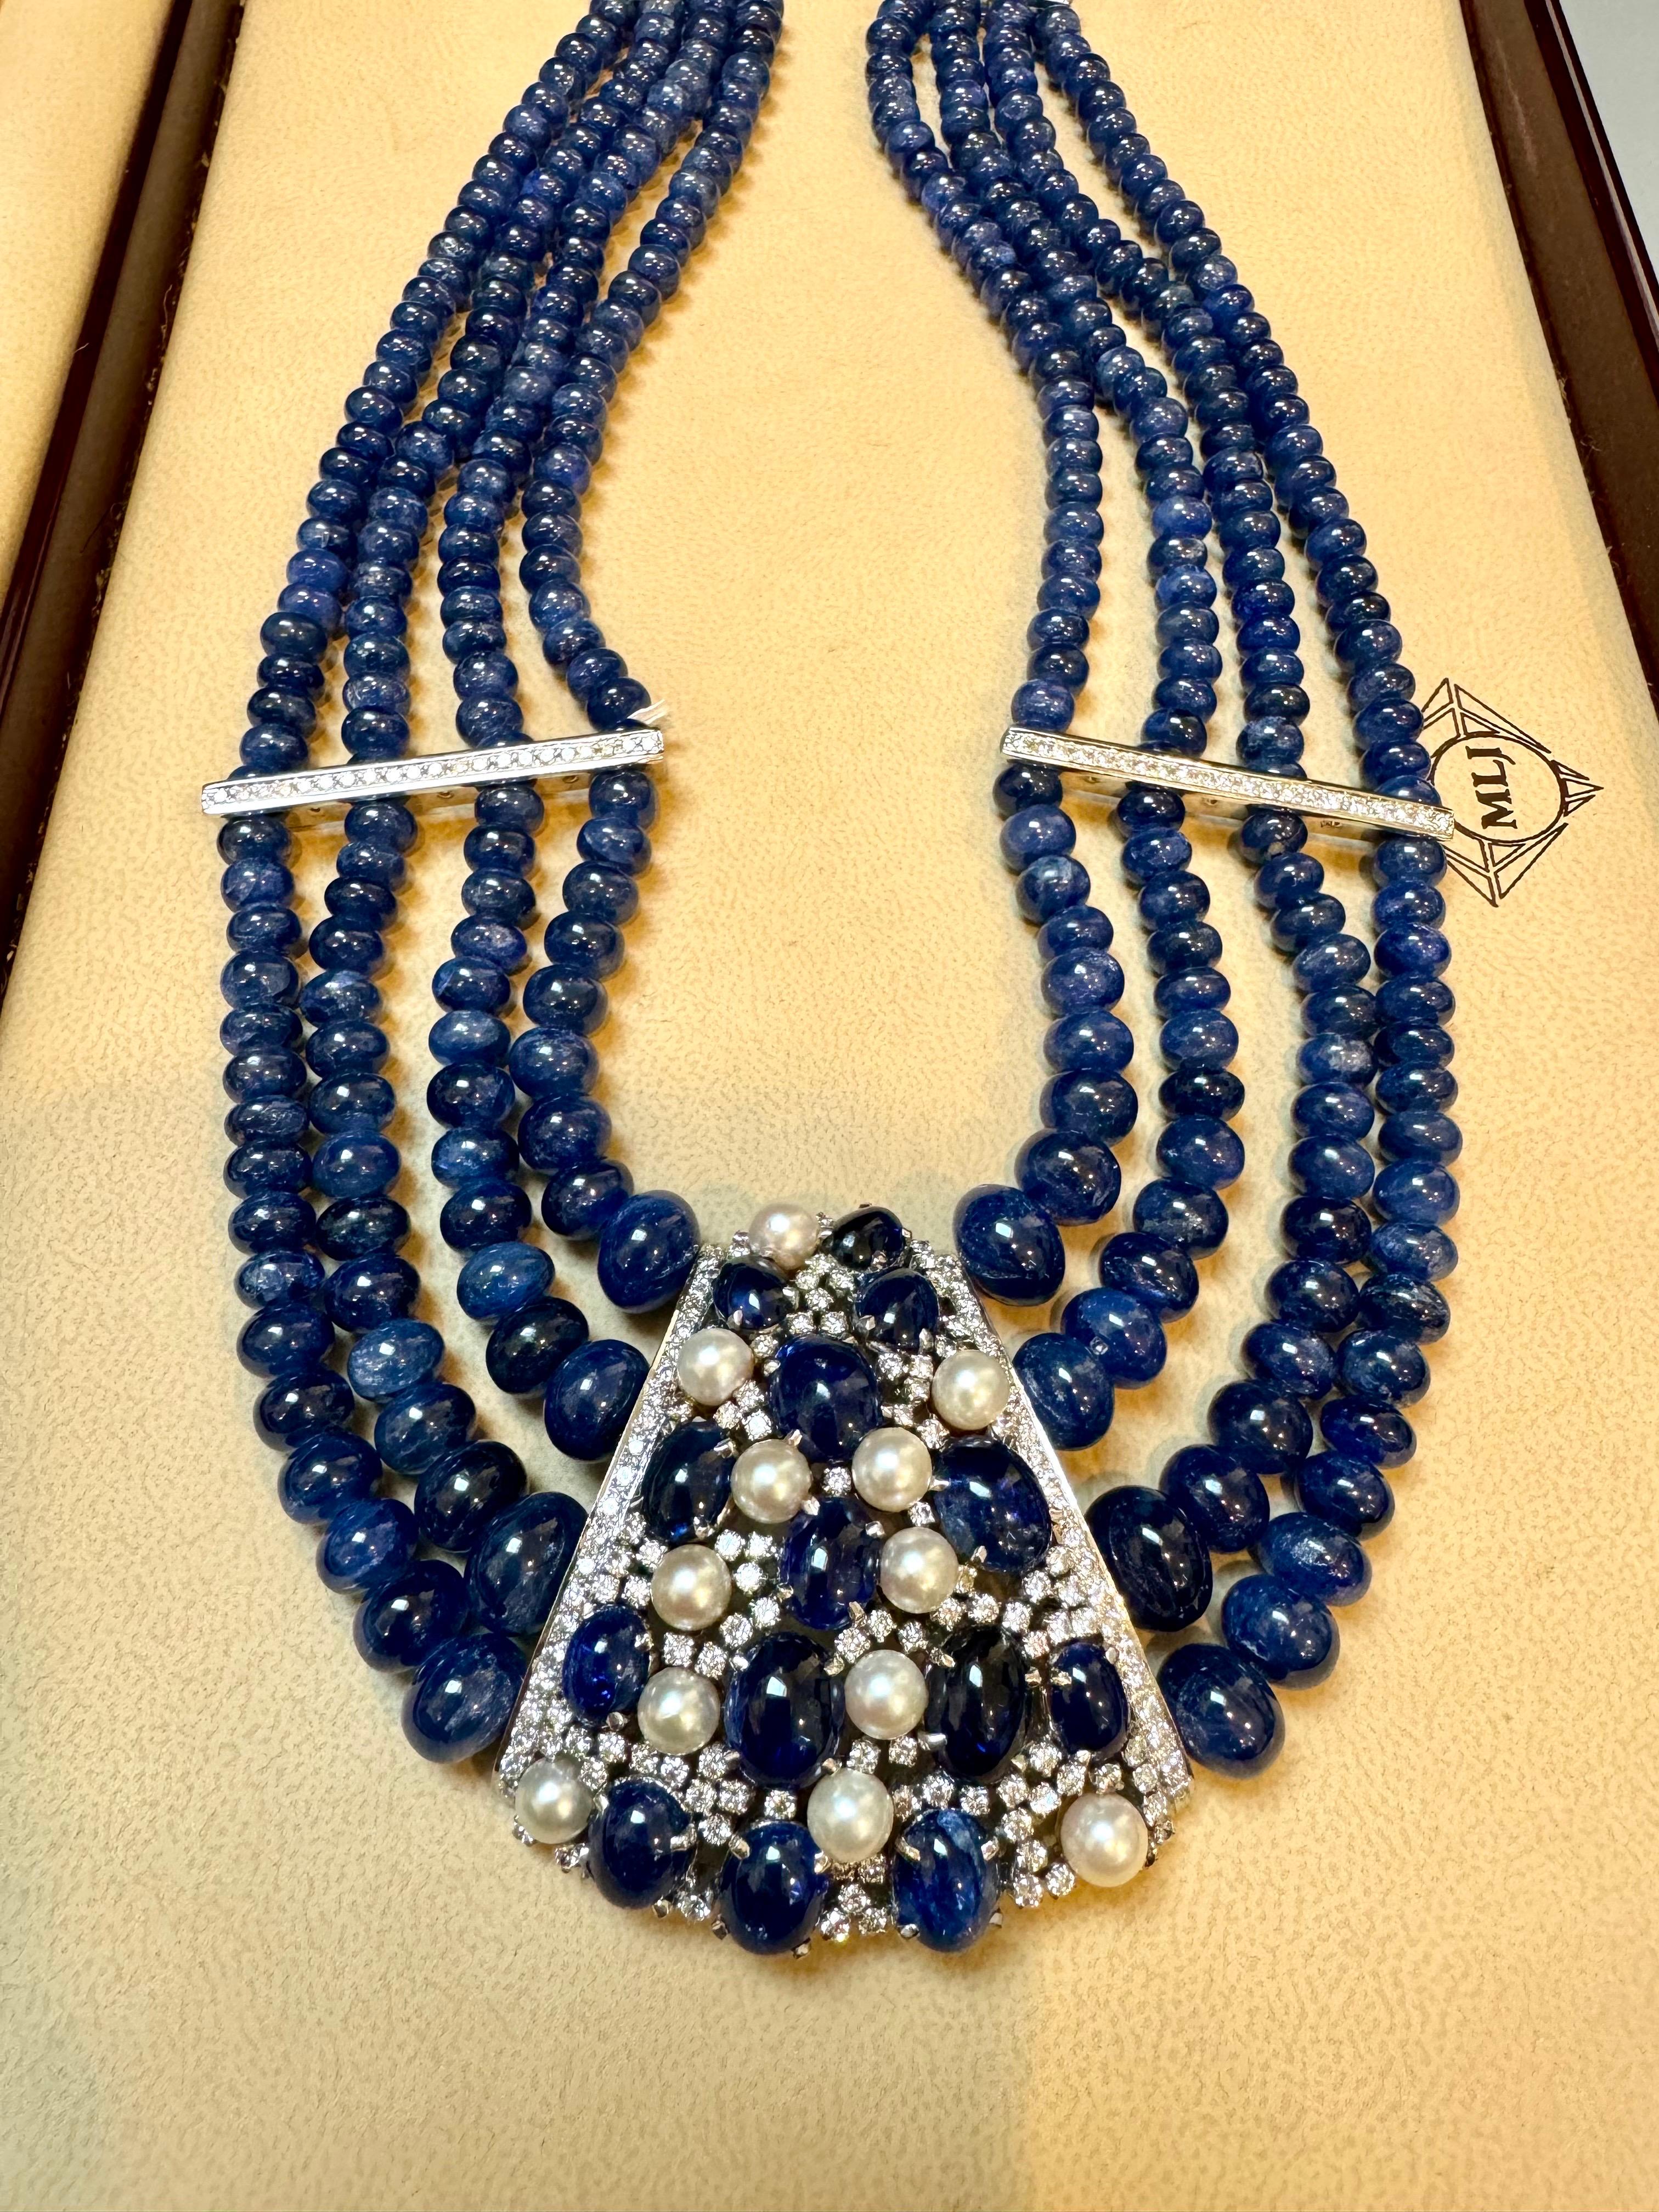 700Ct Sapphire Bead Necklace with cabochon & Diamond Center & Diamond Spacer 18K For Sale 9